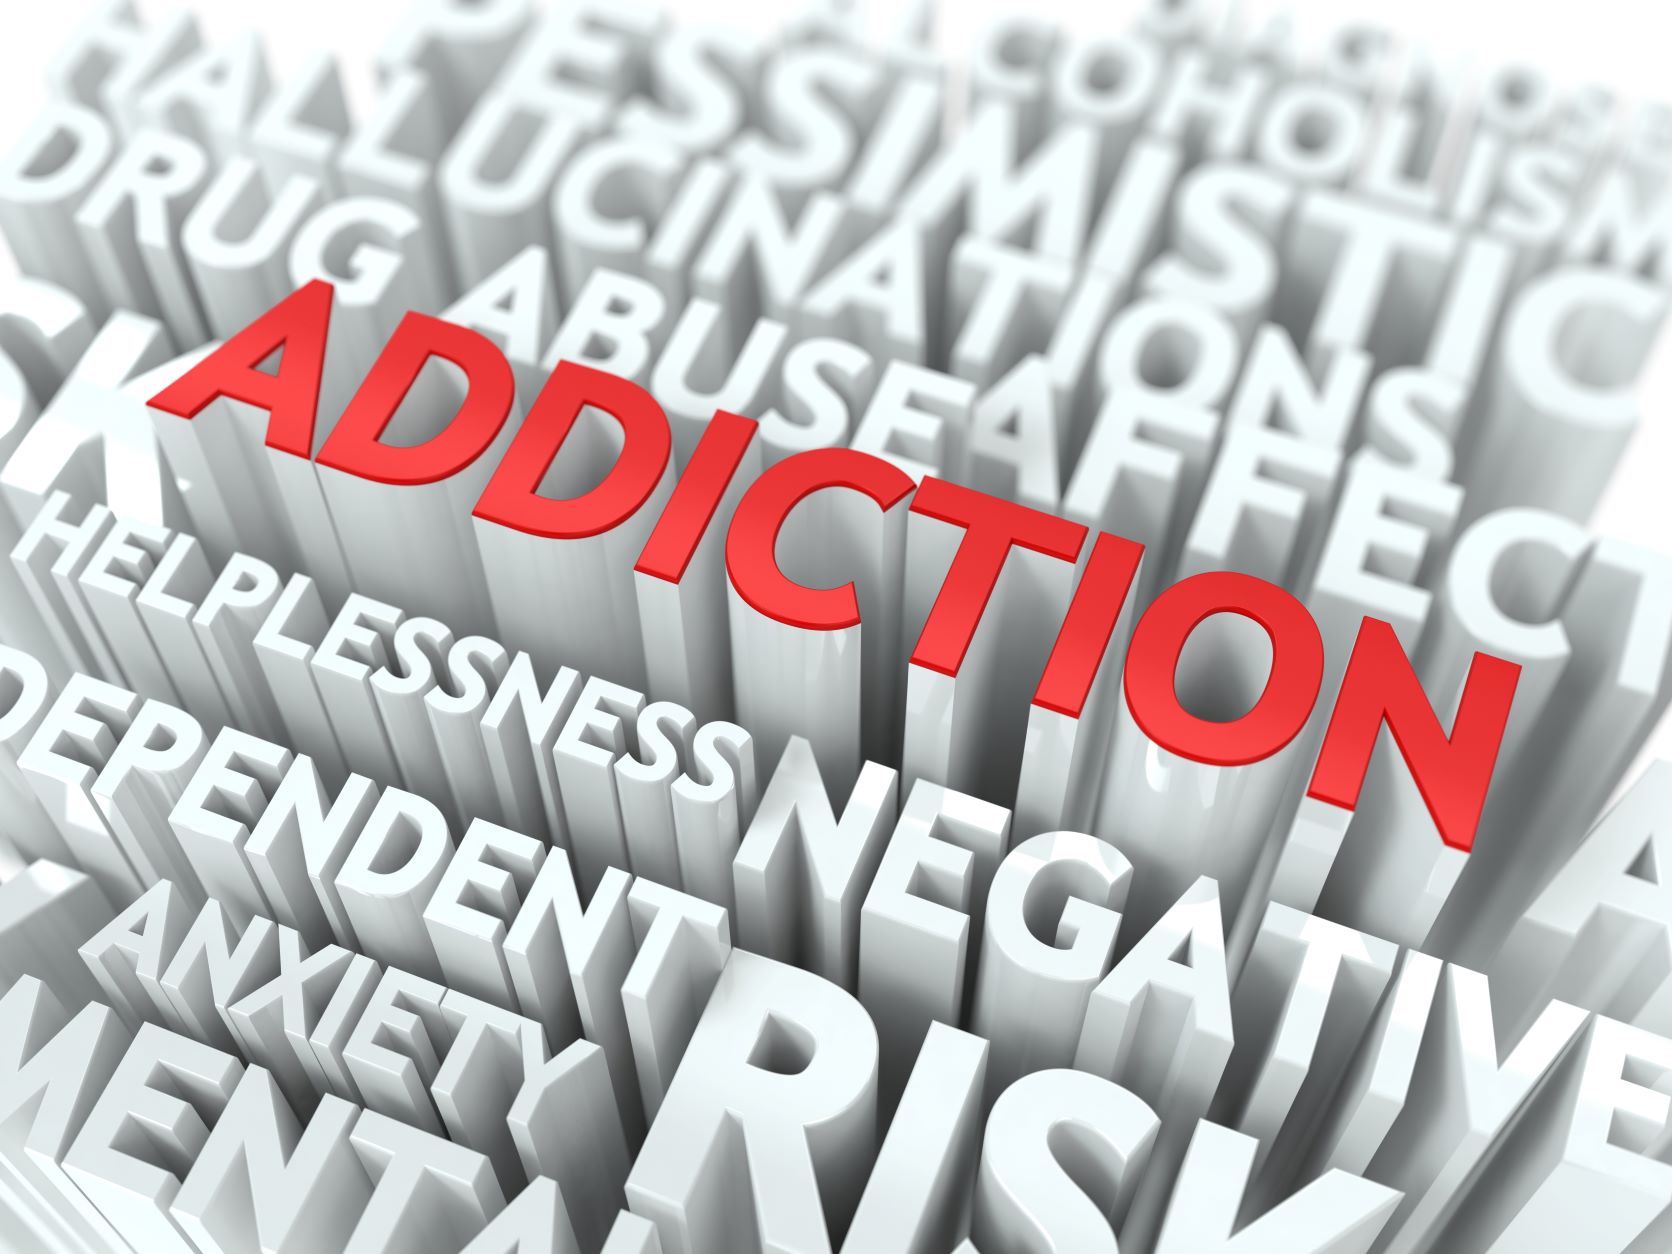 The Addiction Curve: Where We Stand